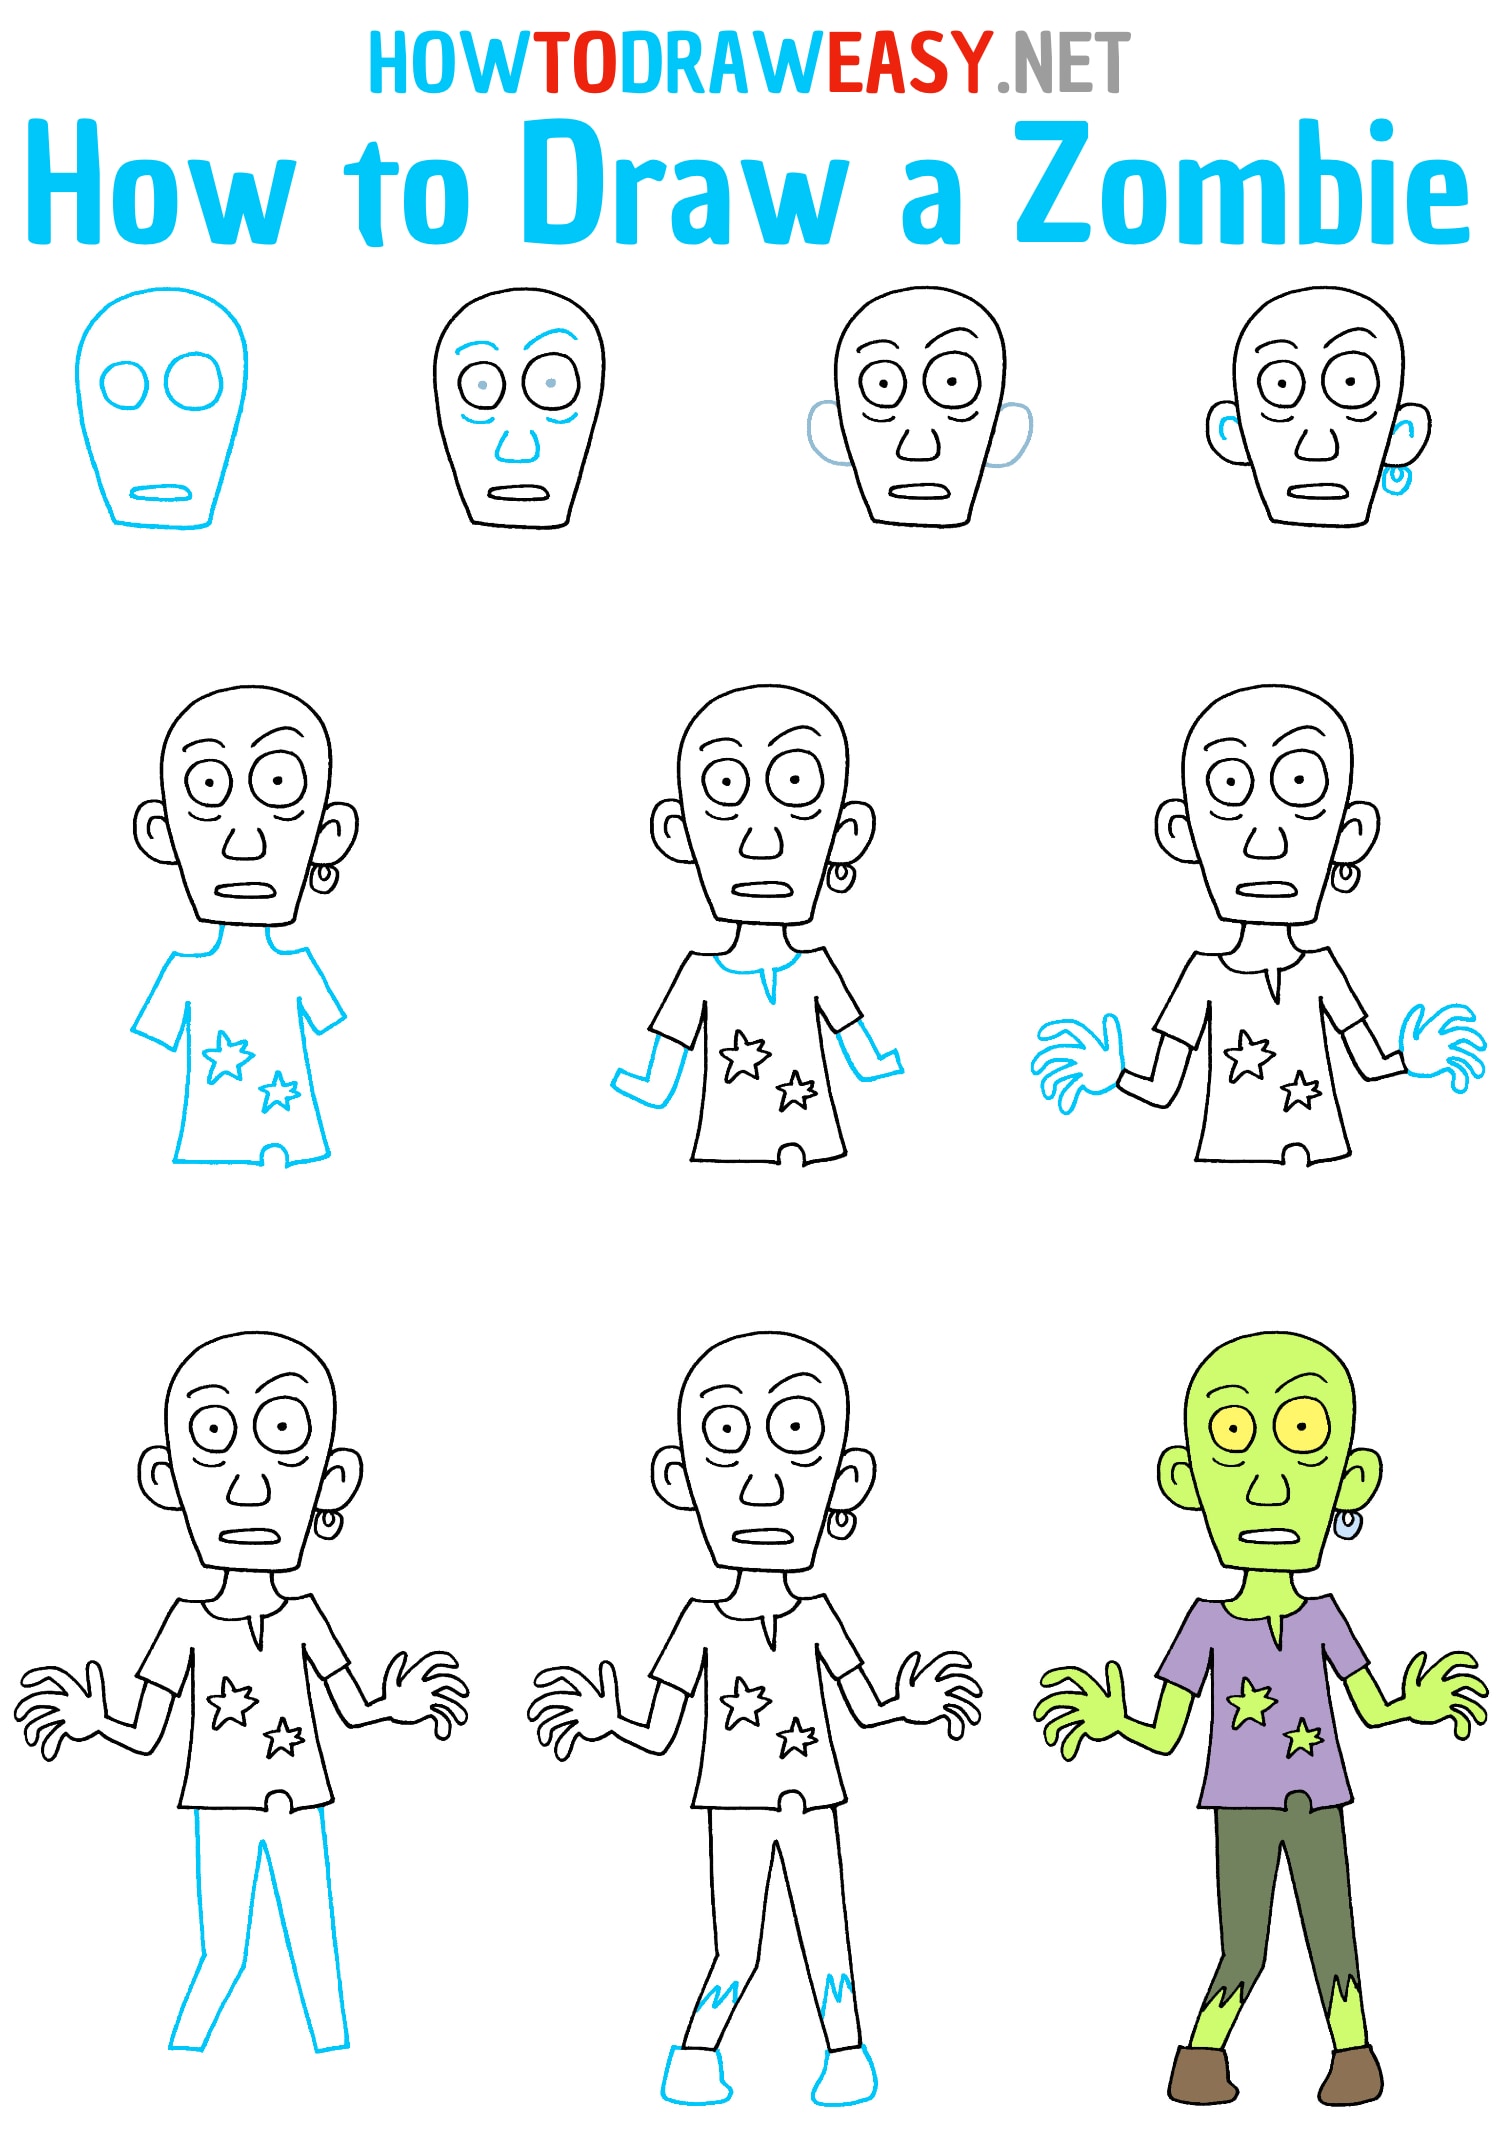 How to Draw a Zombie Step by Step